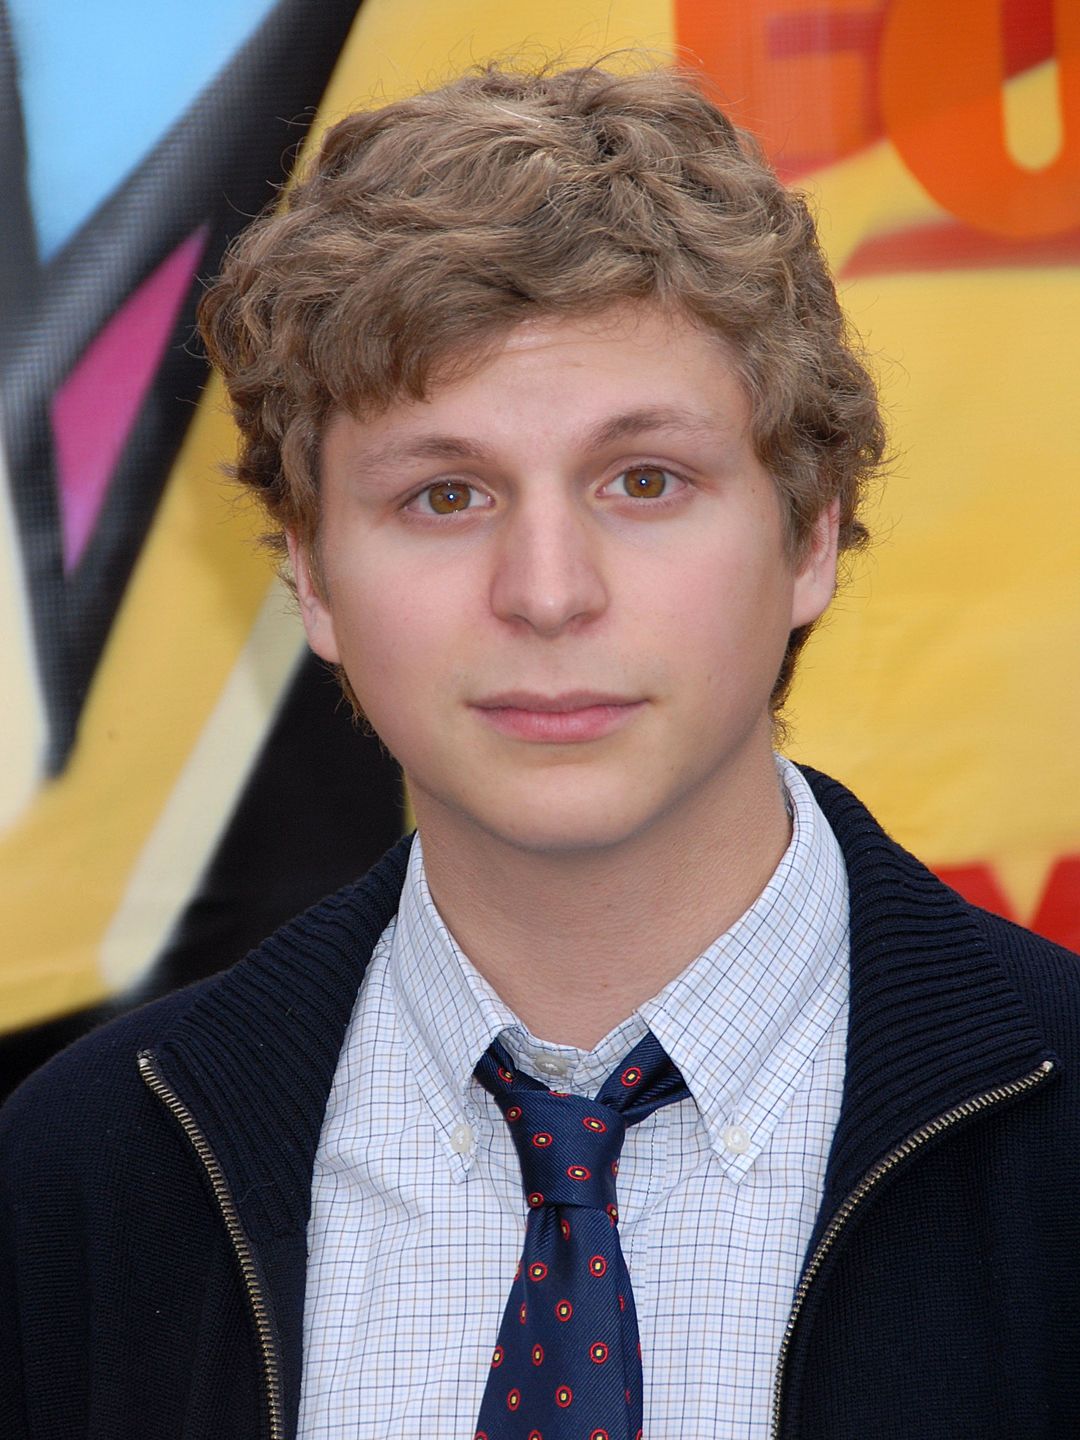 Michael Cera young age